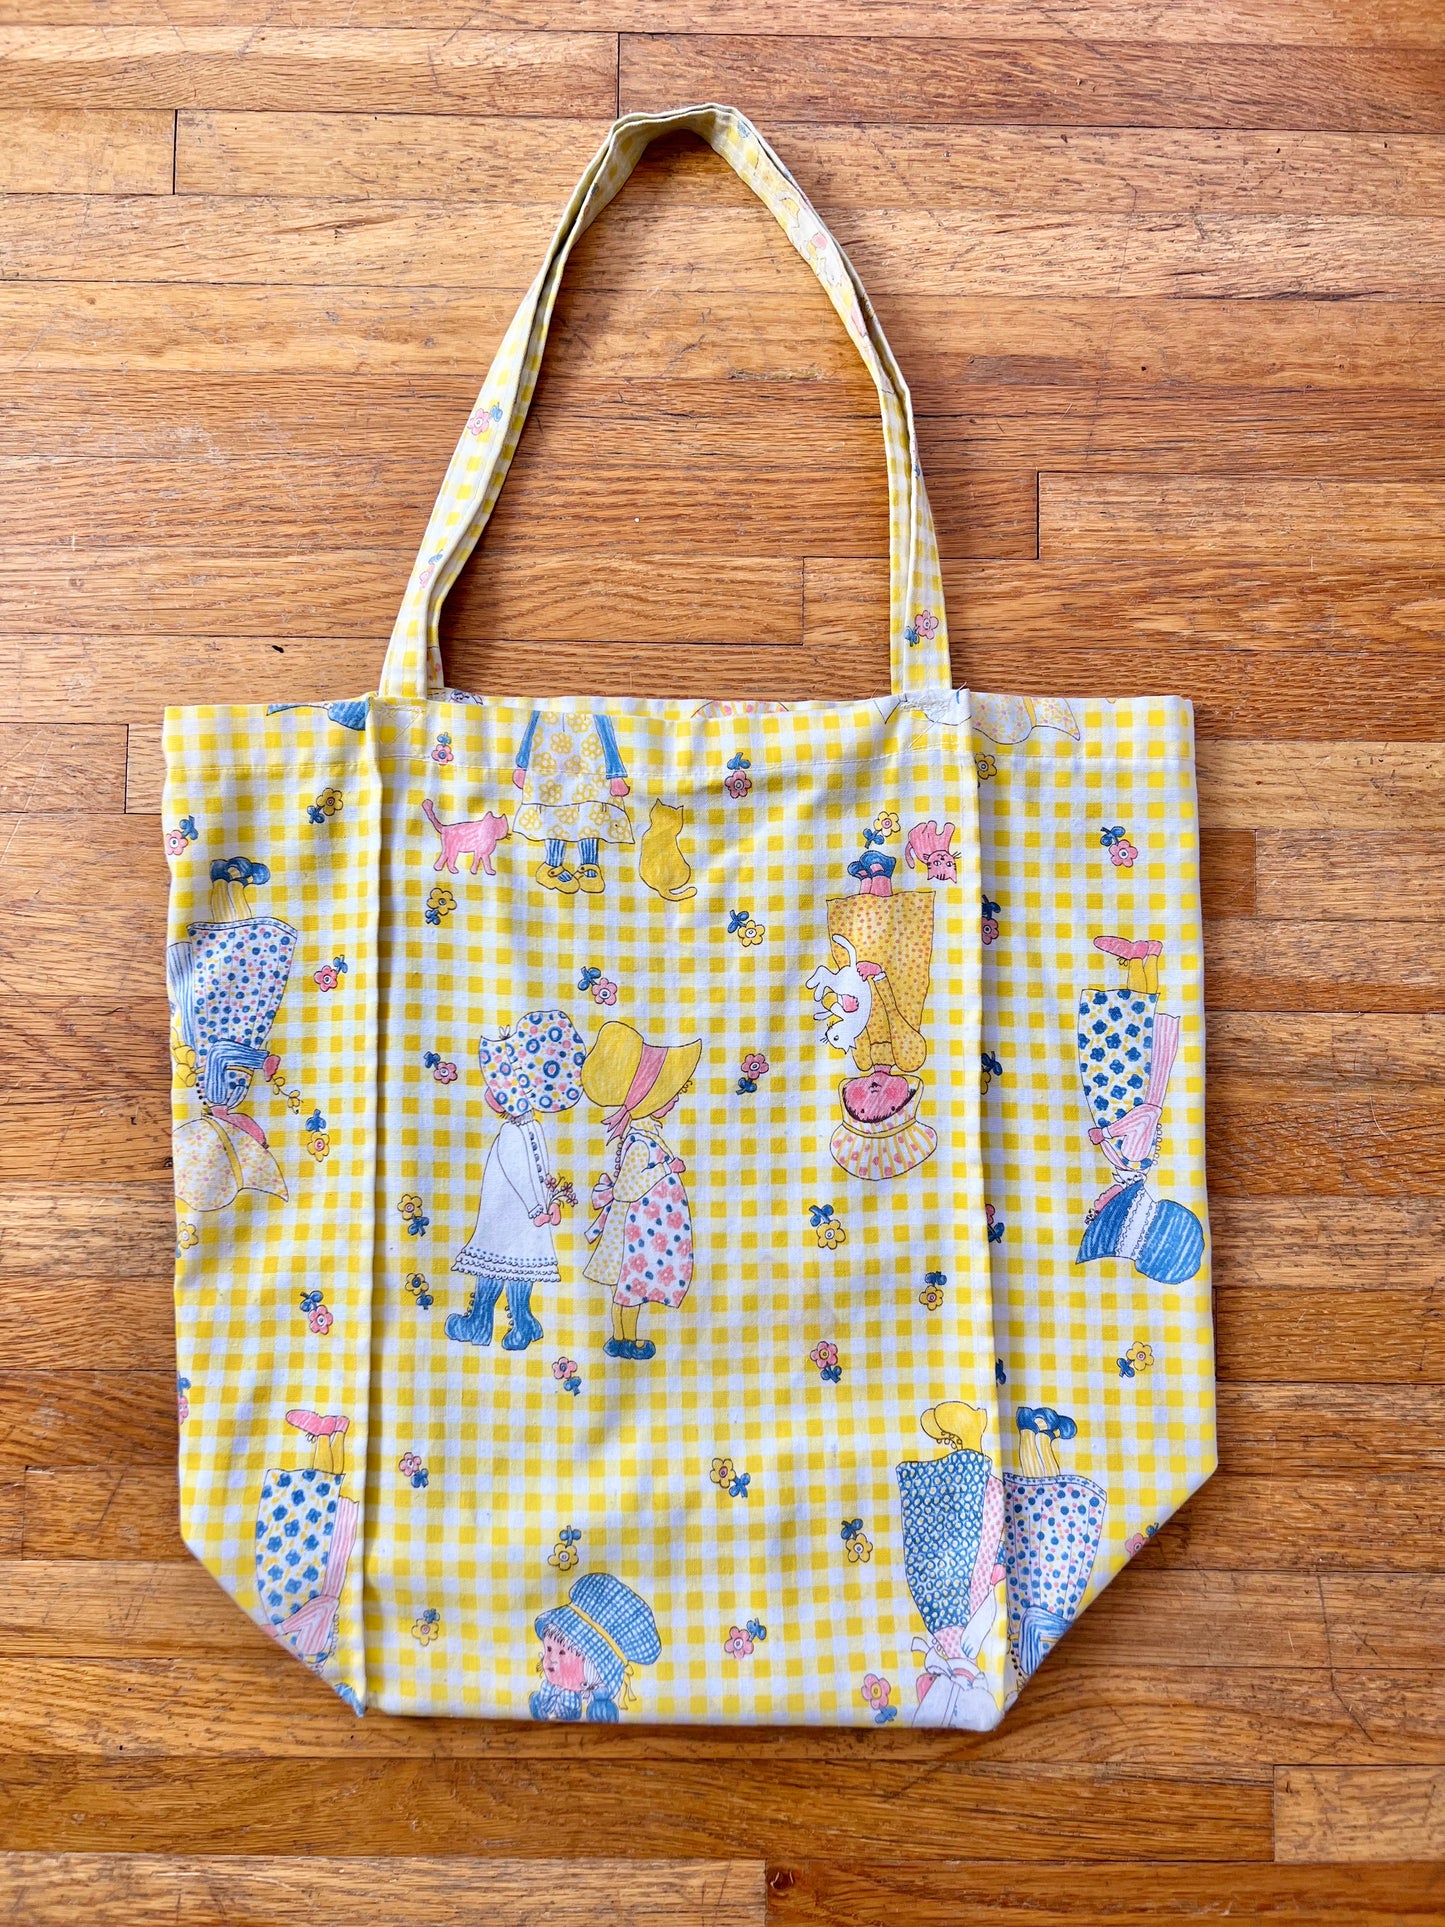 Kitschy Tote